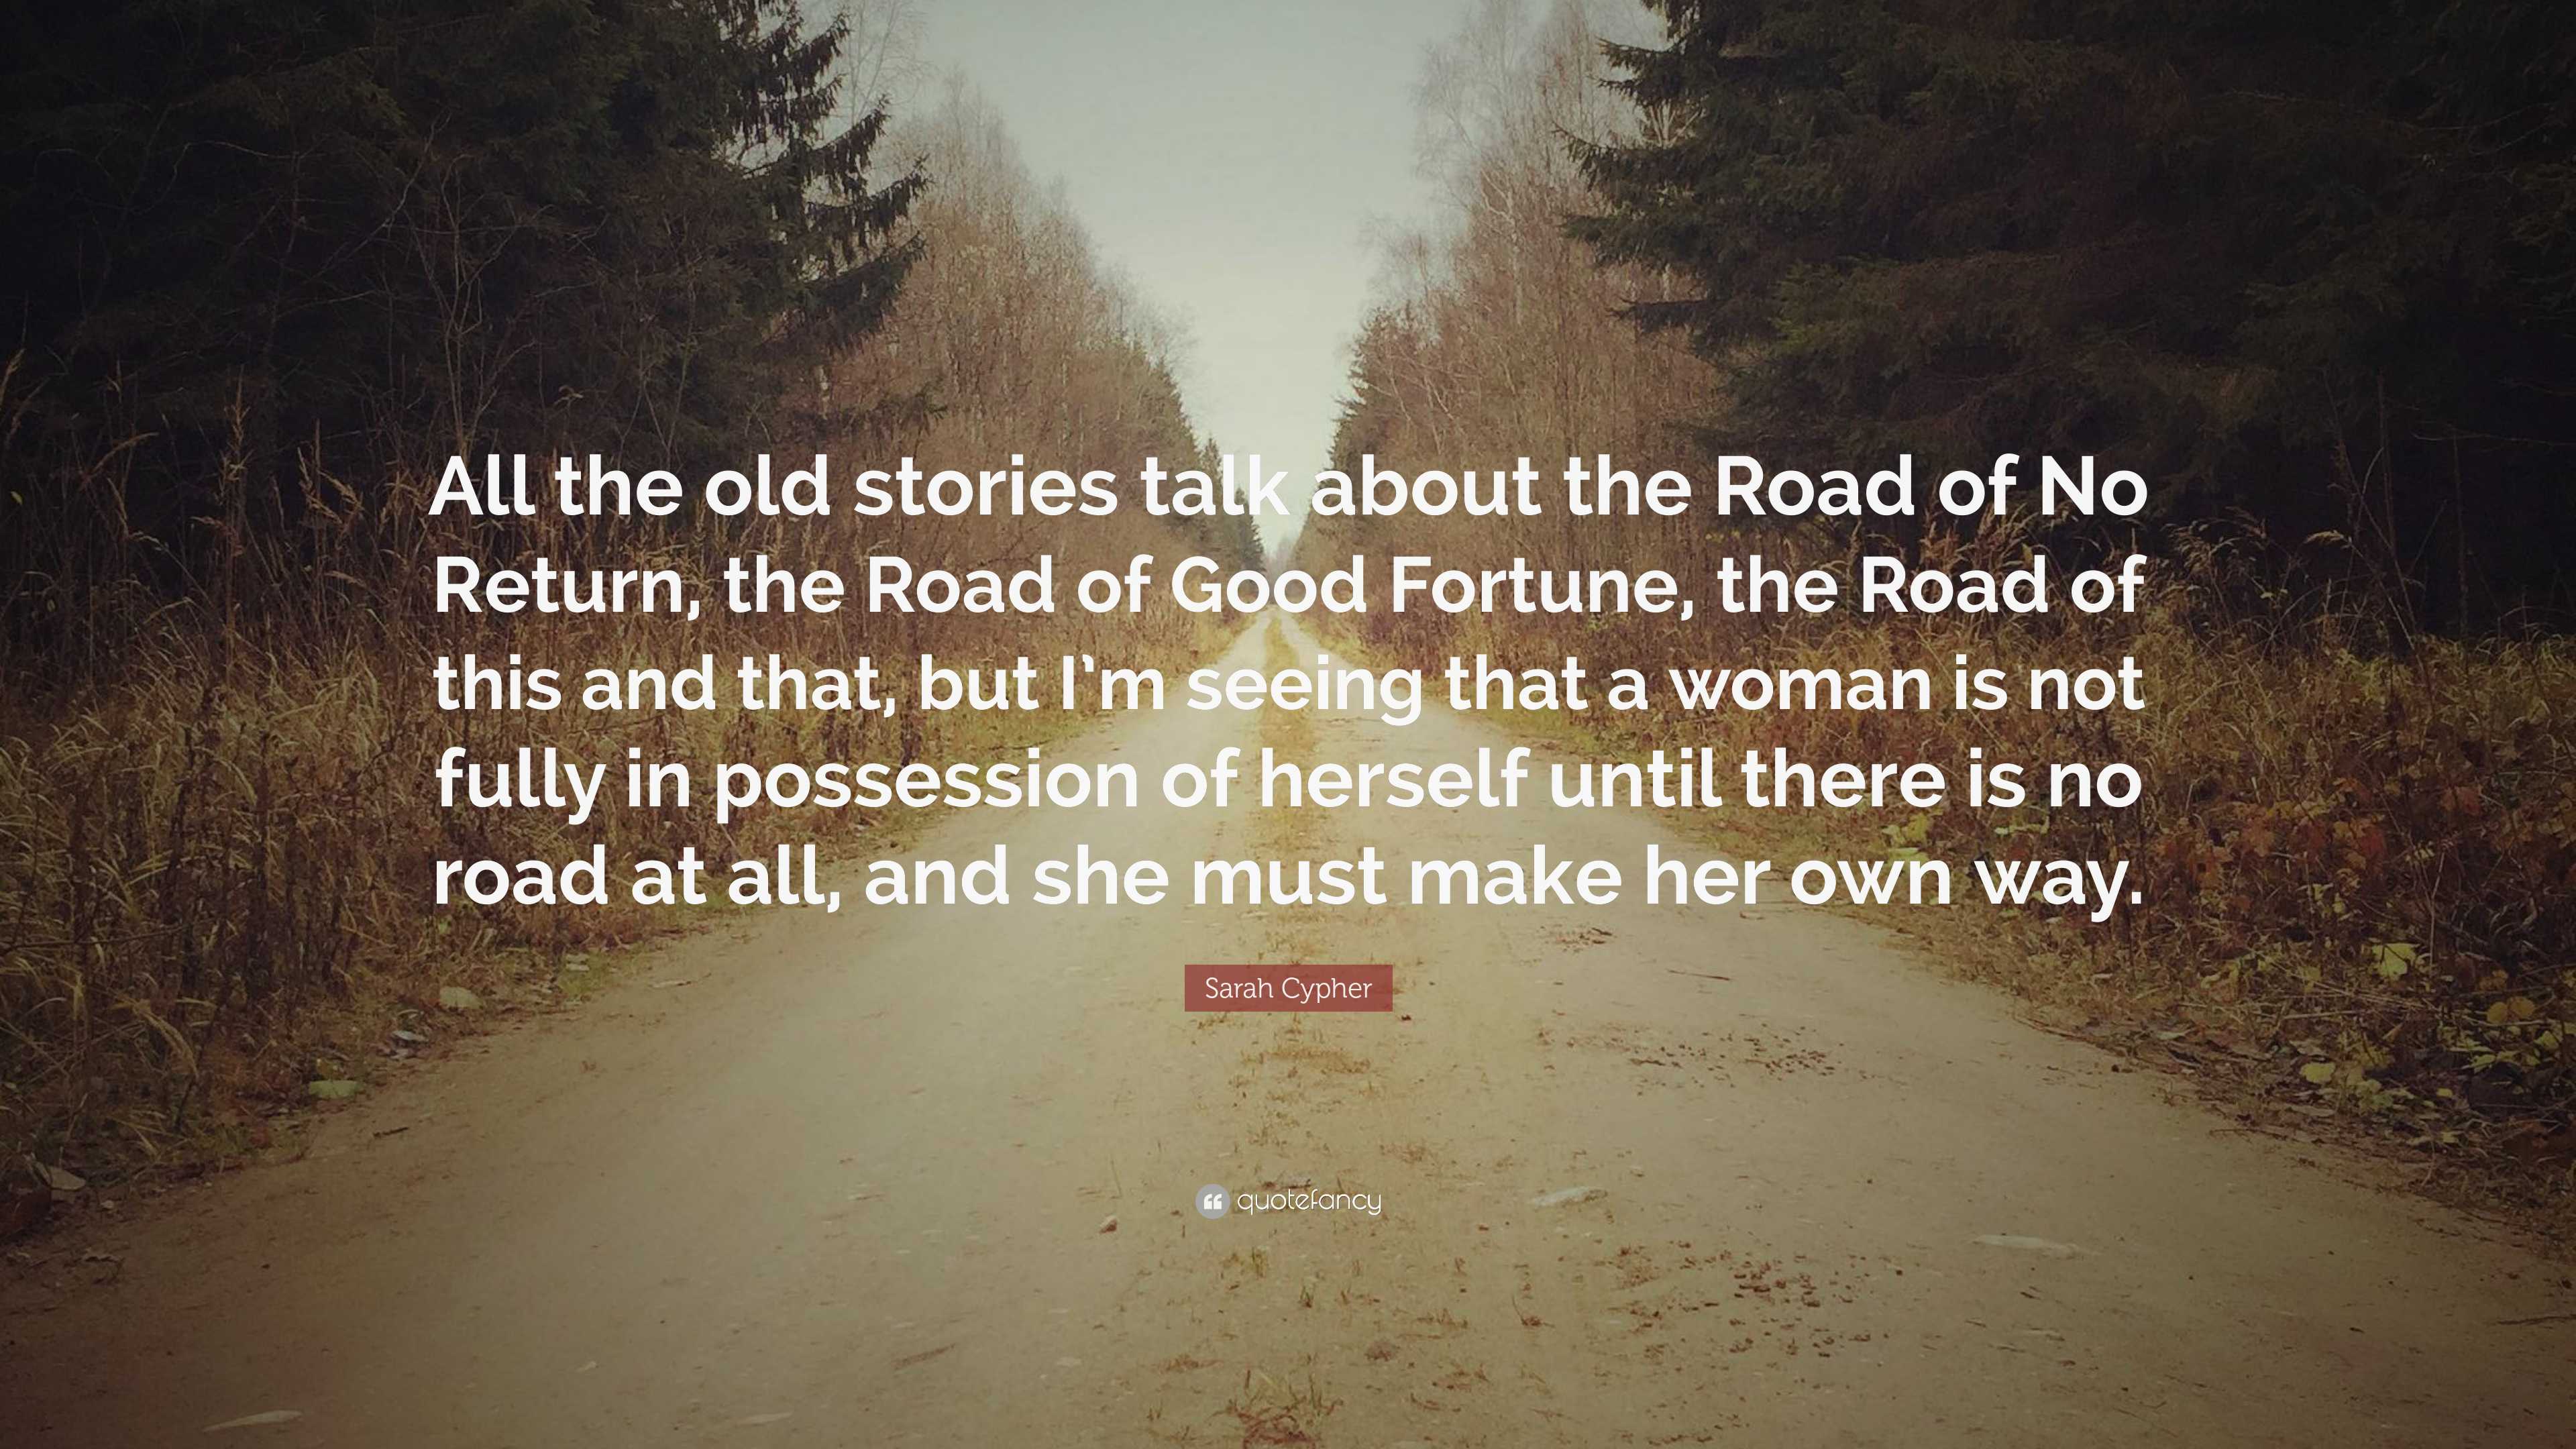 Sarah Cypher Quote: “All the old stories talk about the Road of No ...